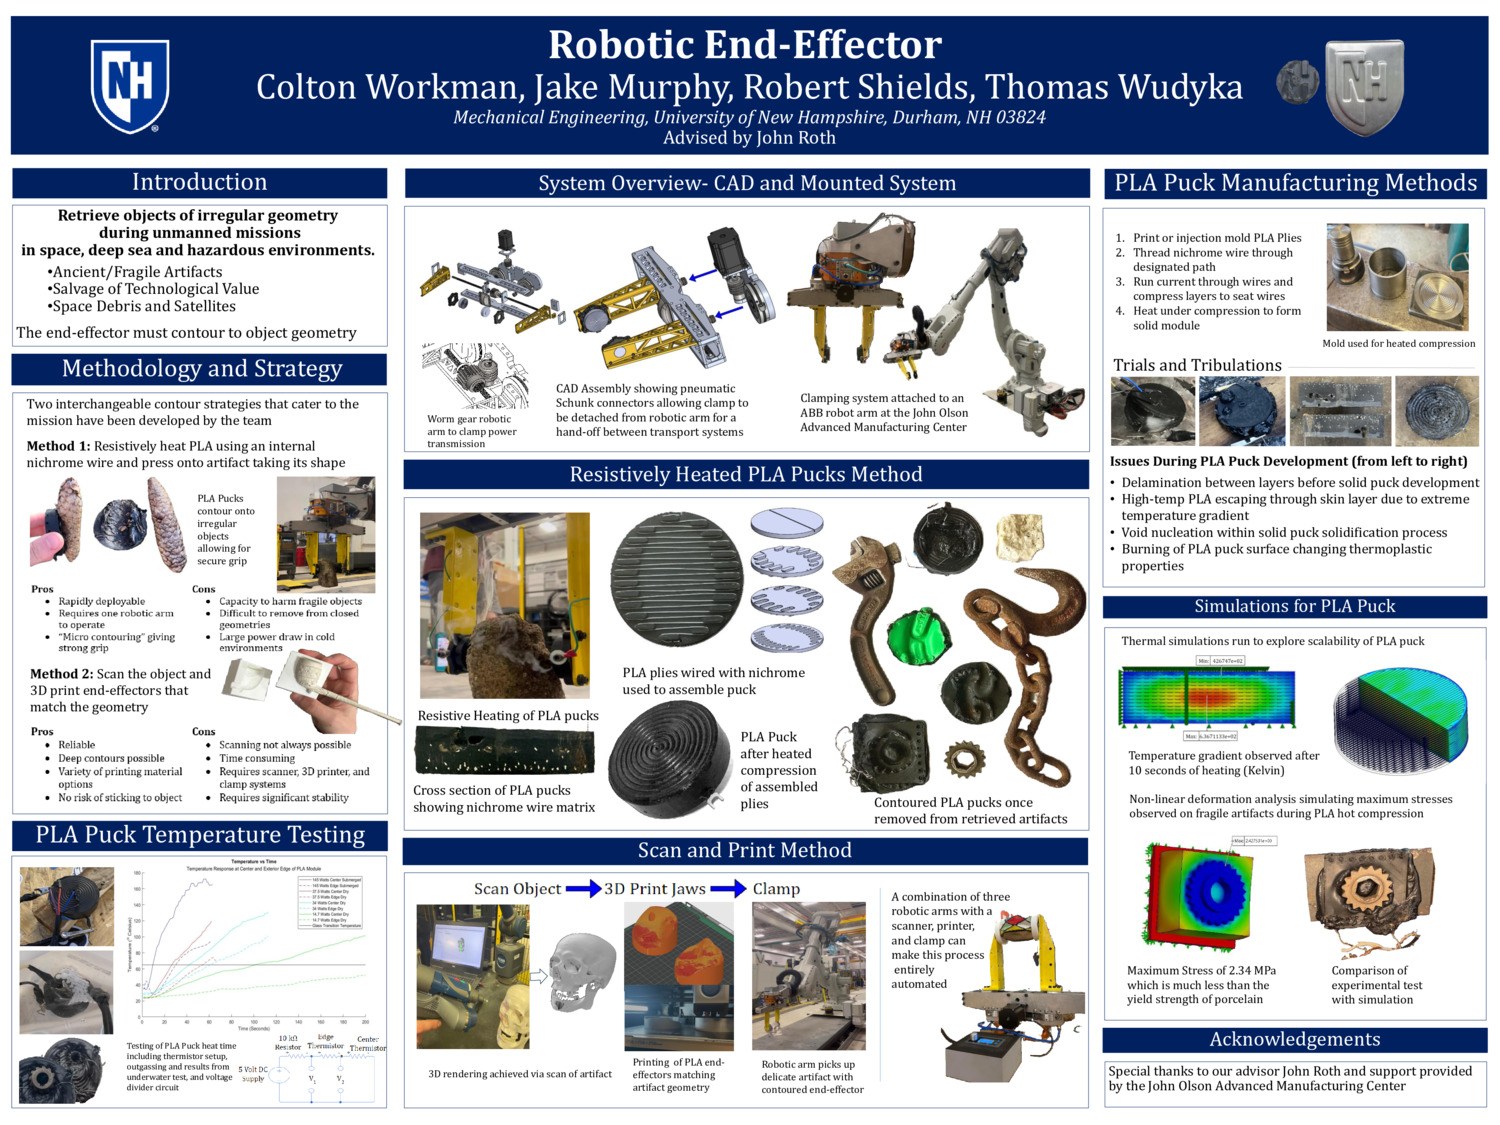 Robotic End-Effector by jpm1148